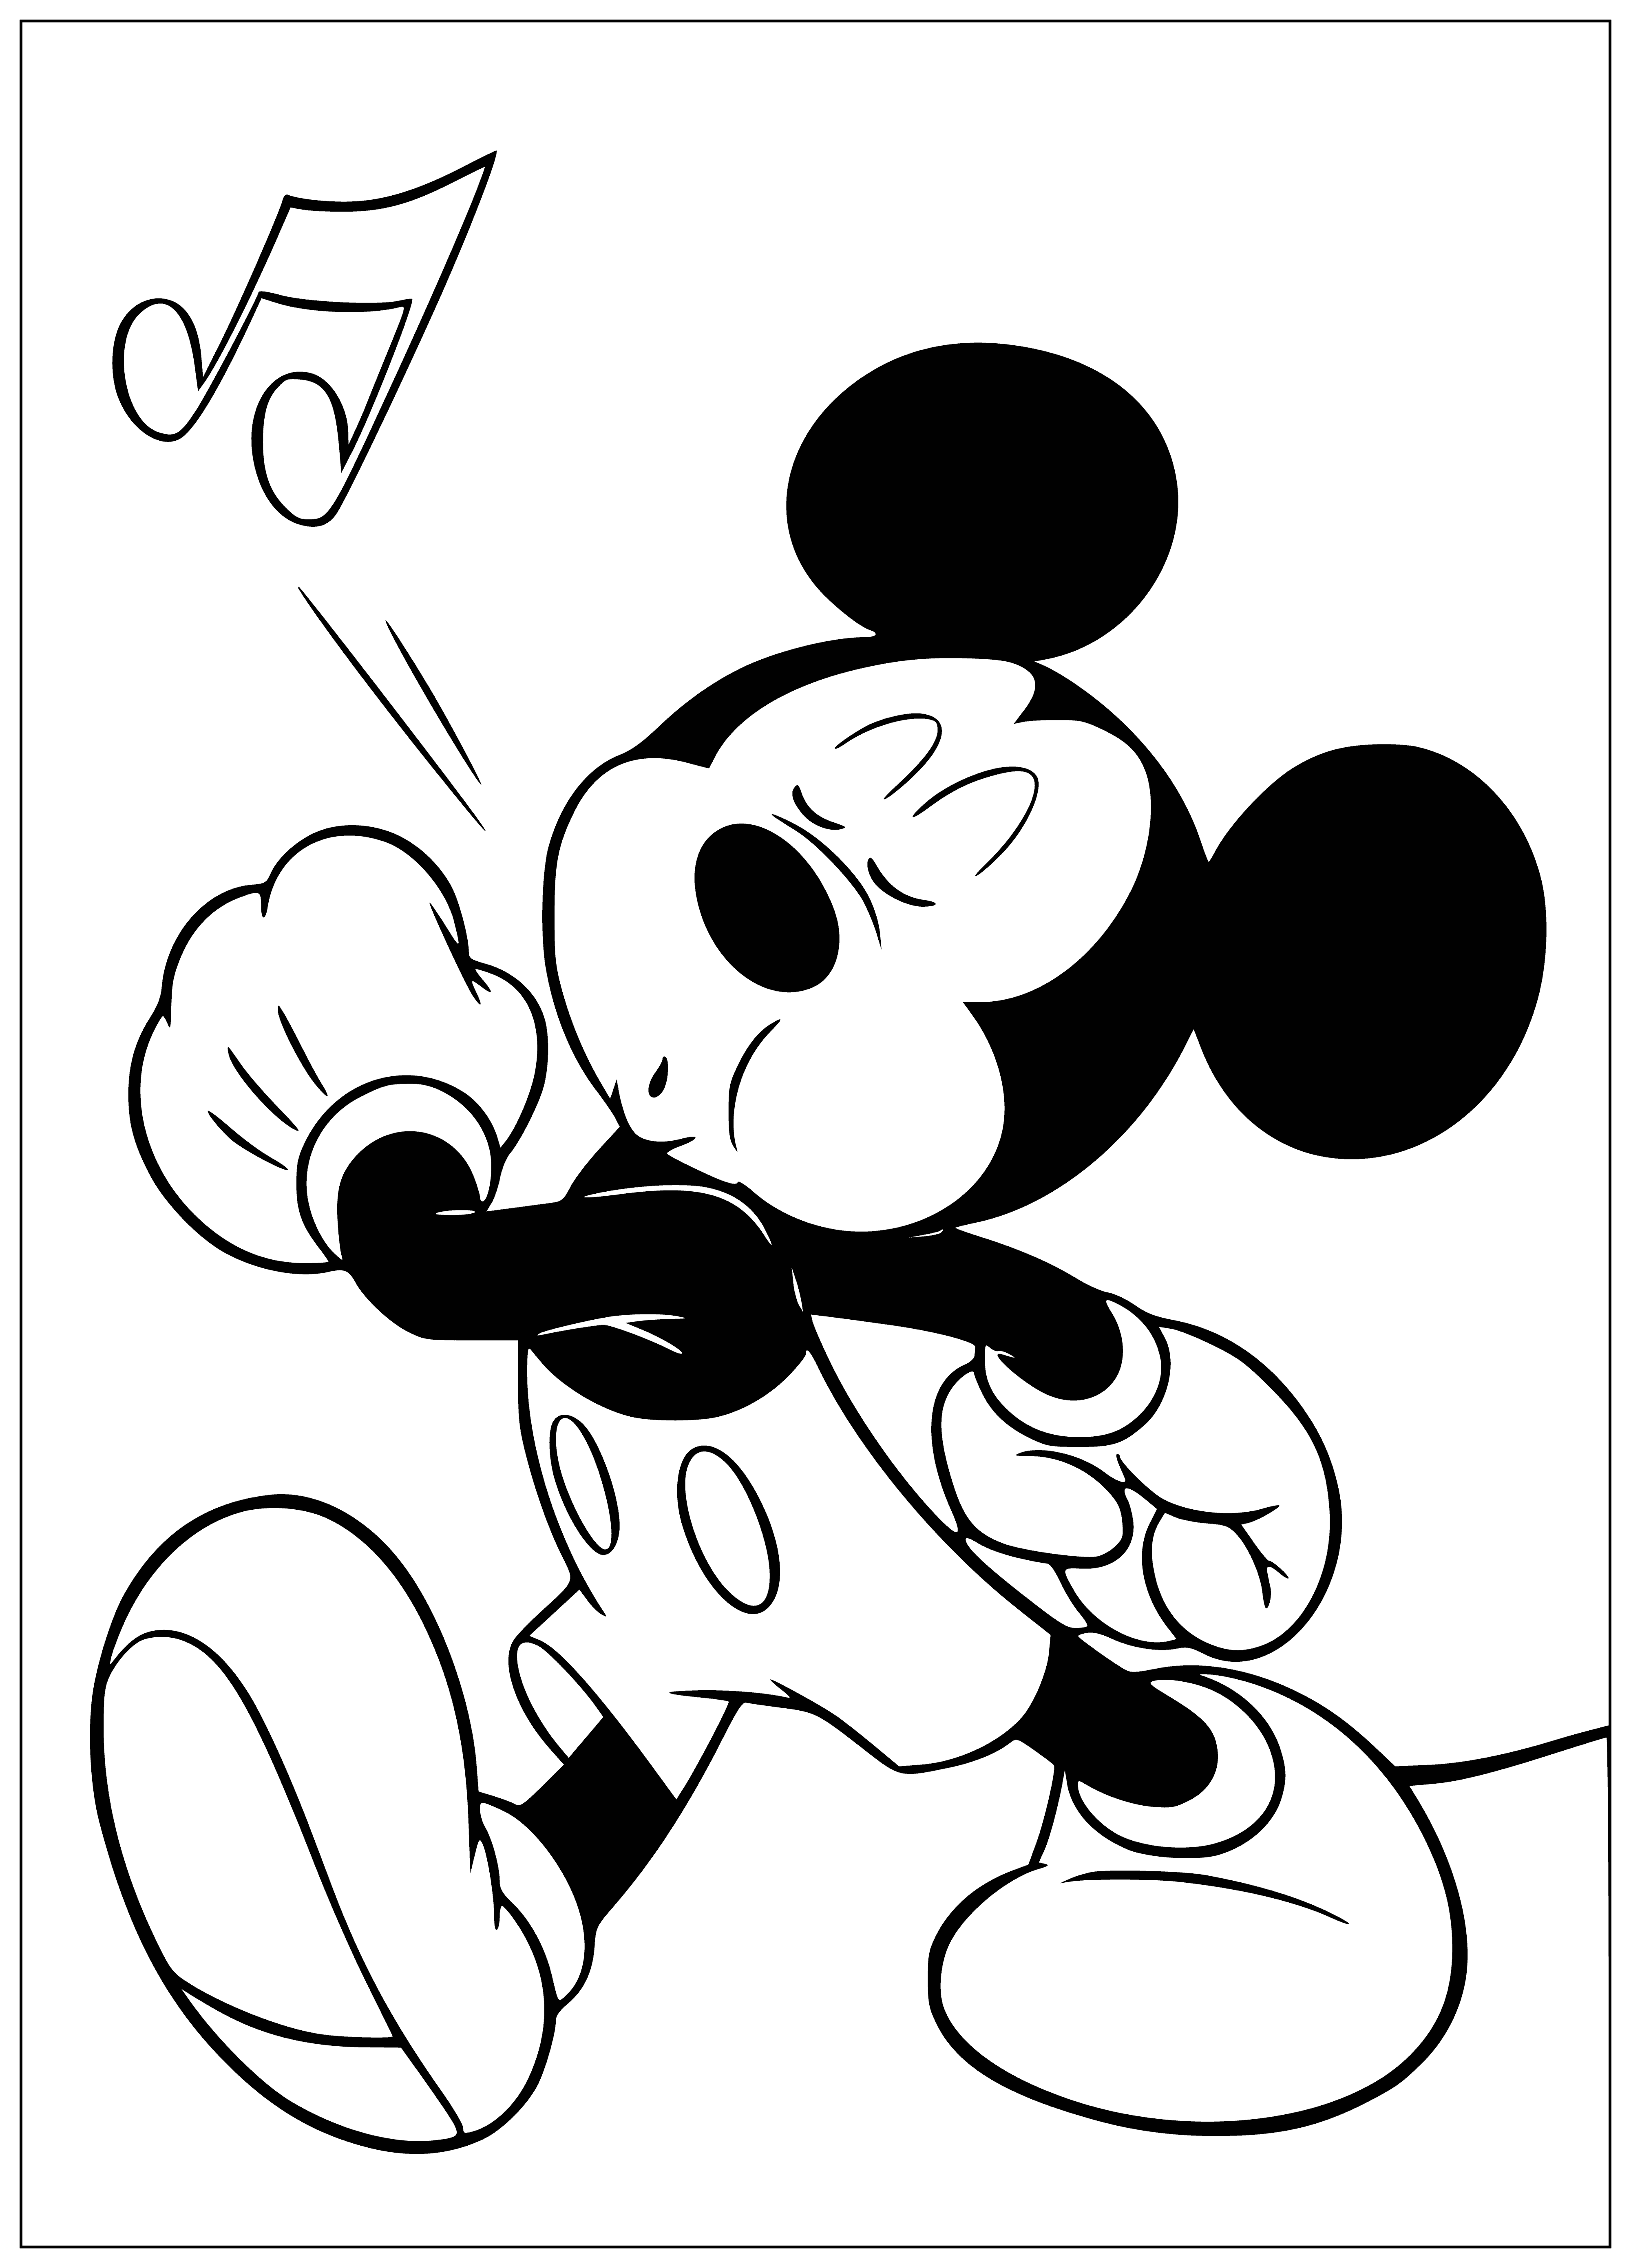 coloring page: Iconic cartoon character Mickey Mouse first appeared in 1928 and is now recognized worldwide.